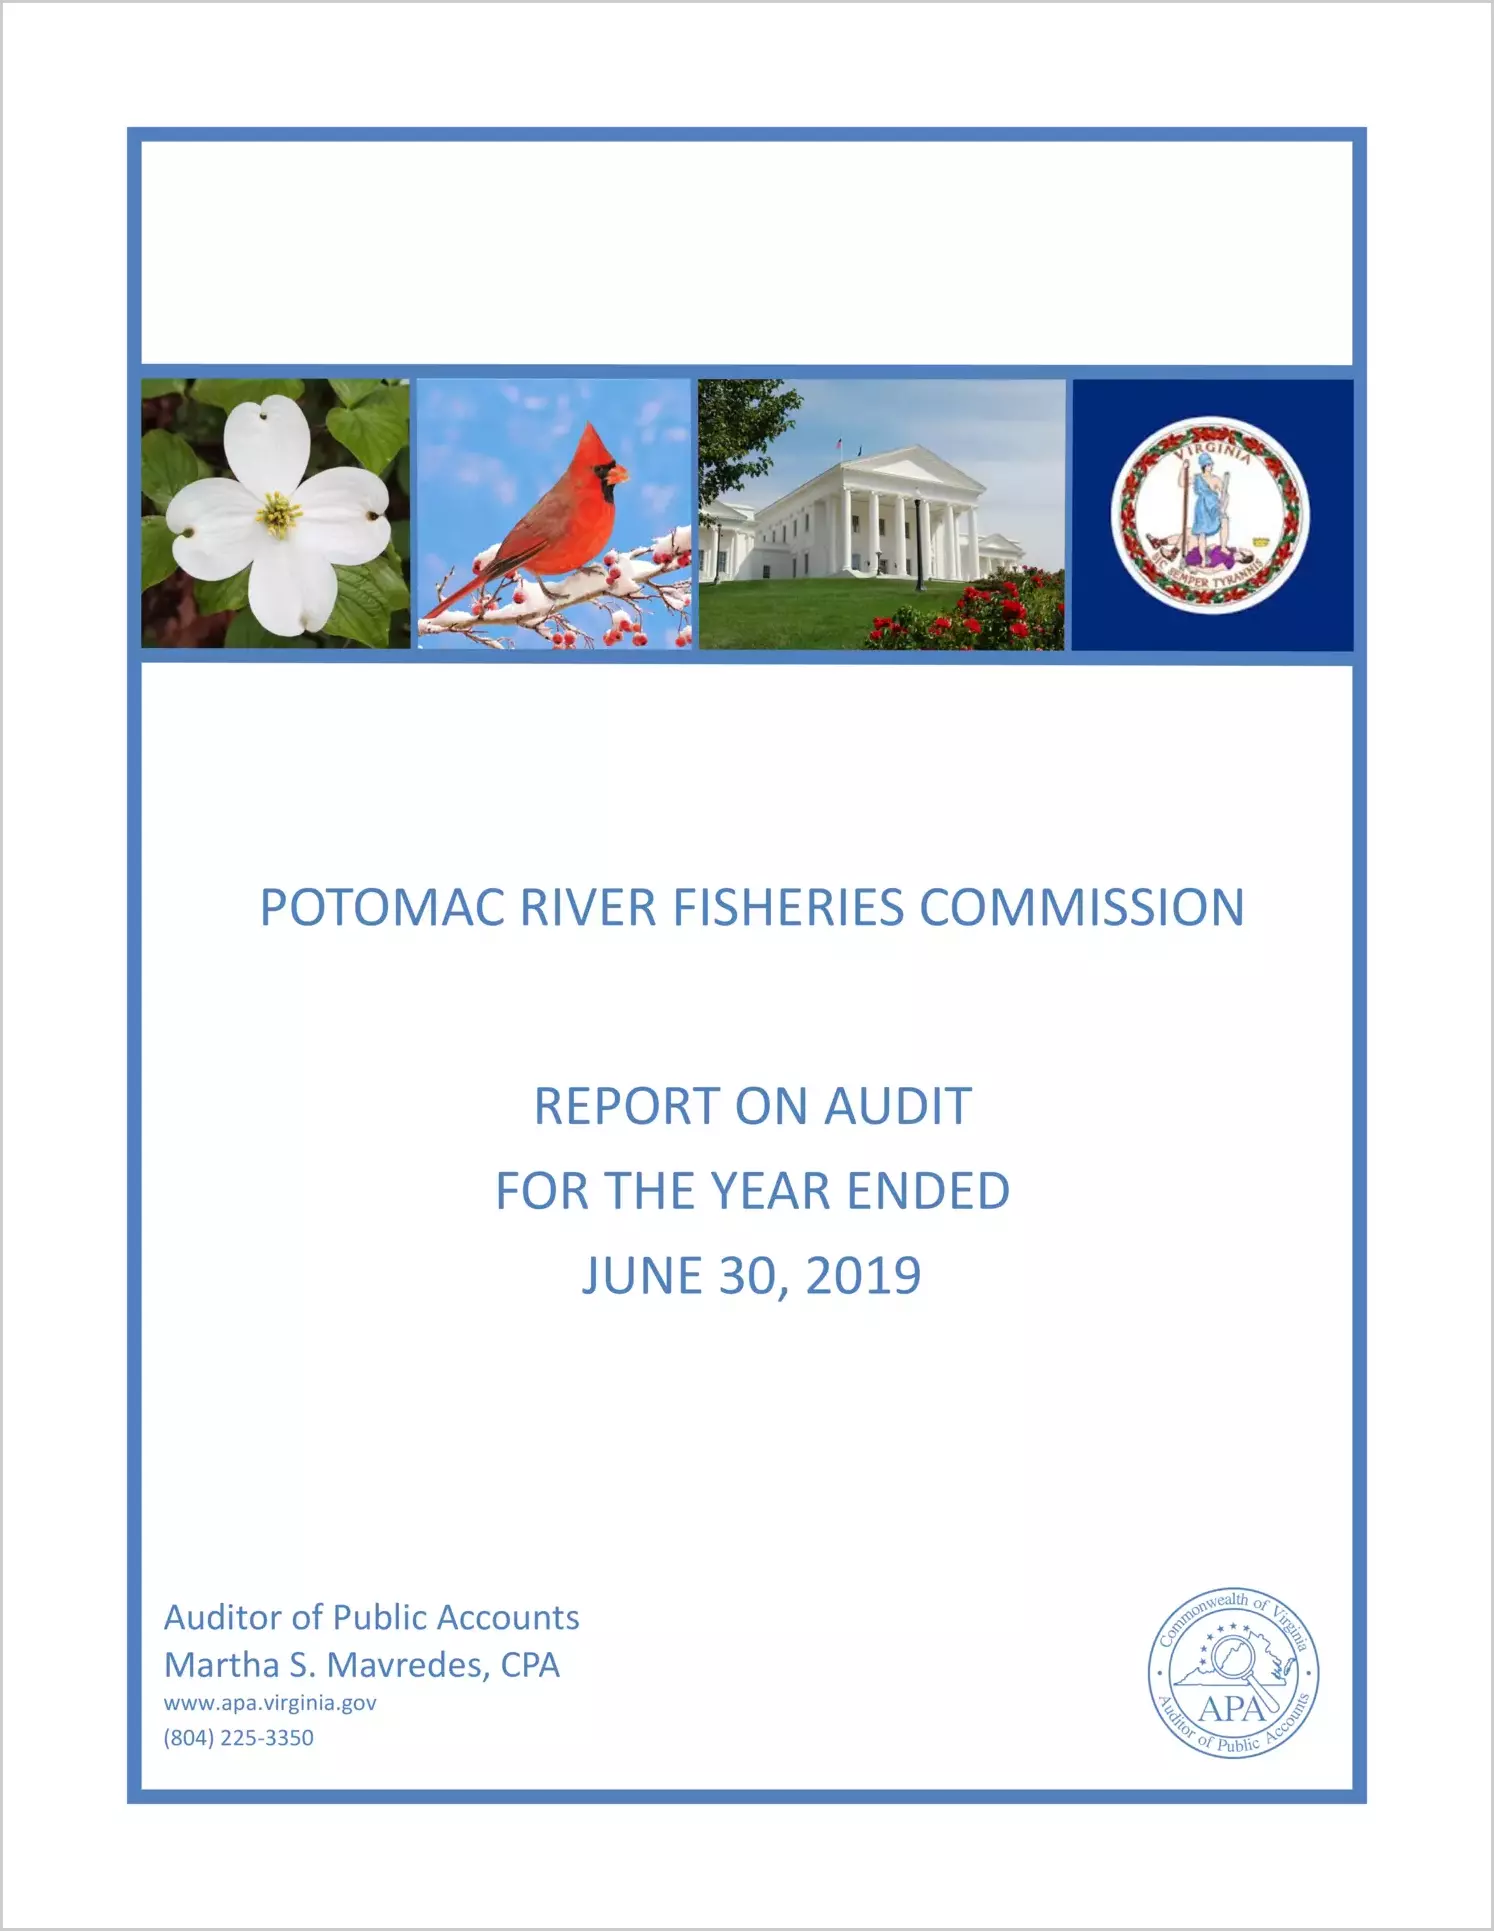 Potomac River Fisheries Commission for the year ended June 30, 2019